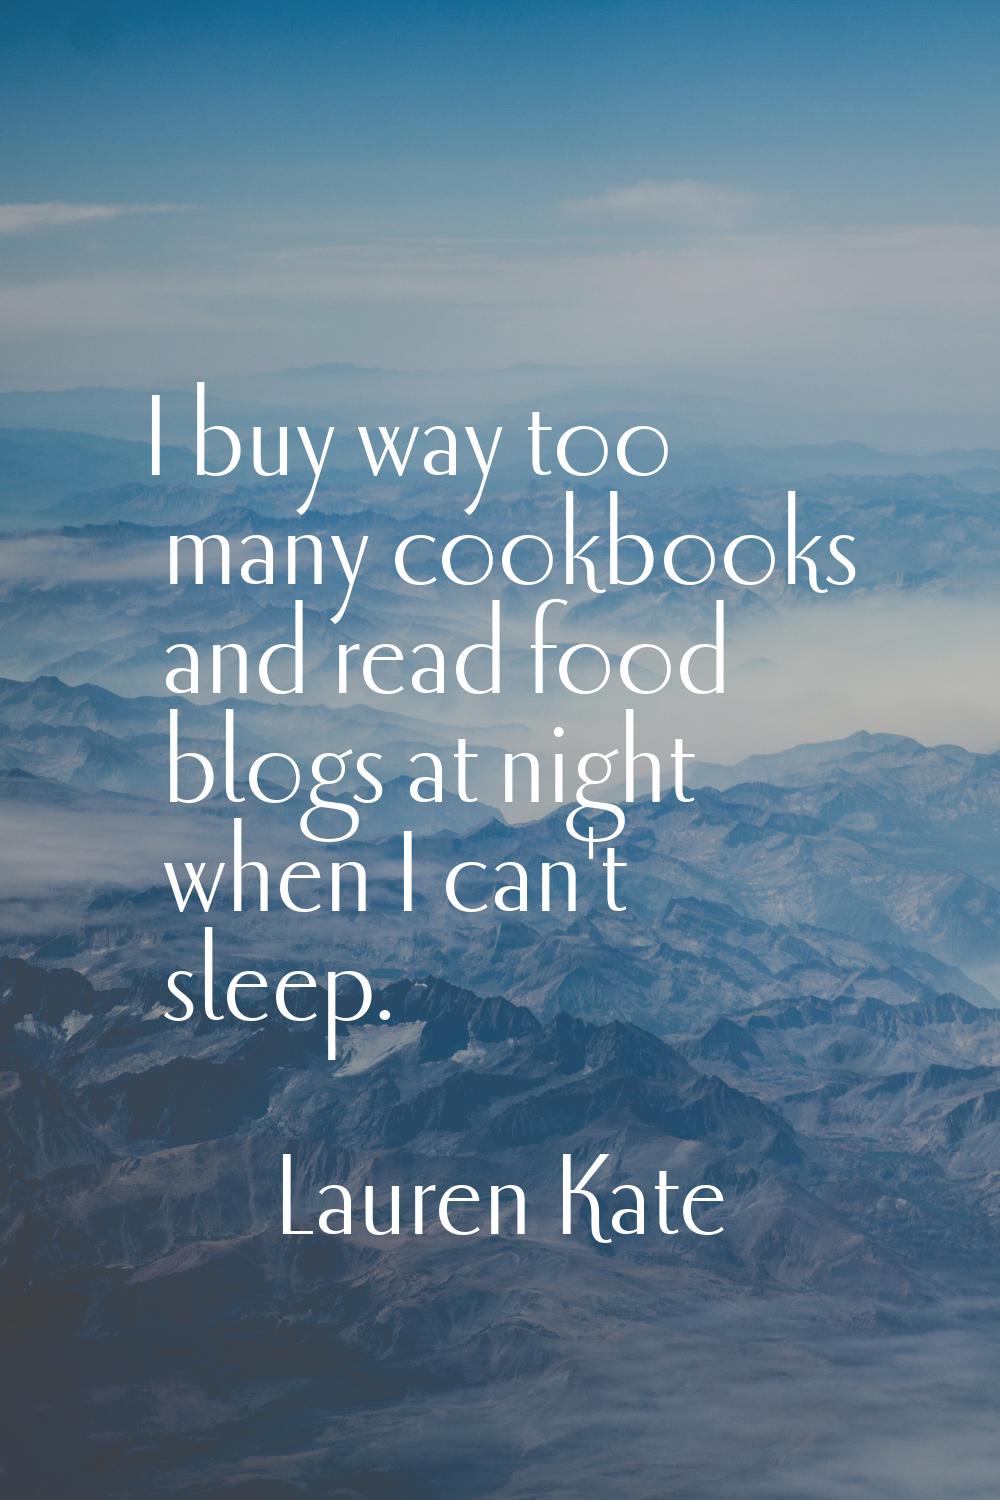 I buy way too many cookbooks and read food blogs at night when I can't sleep.